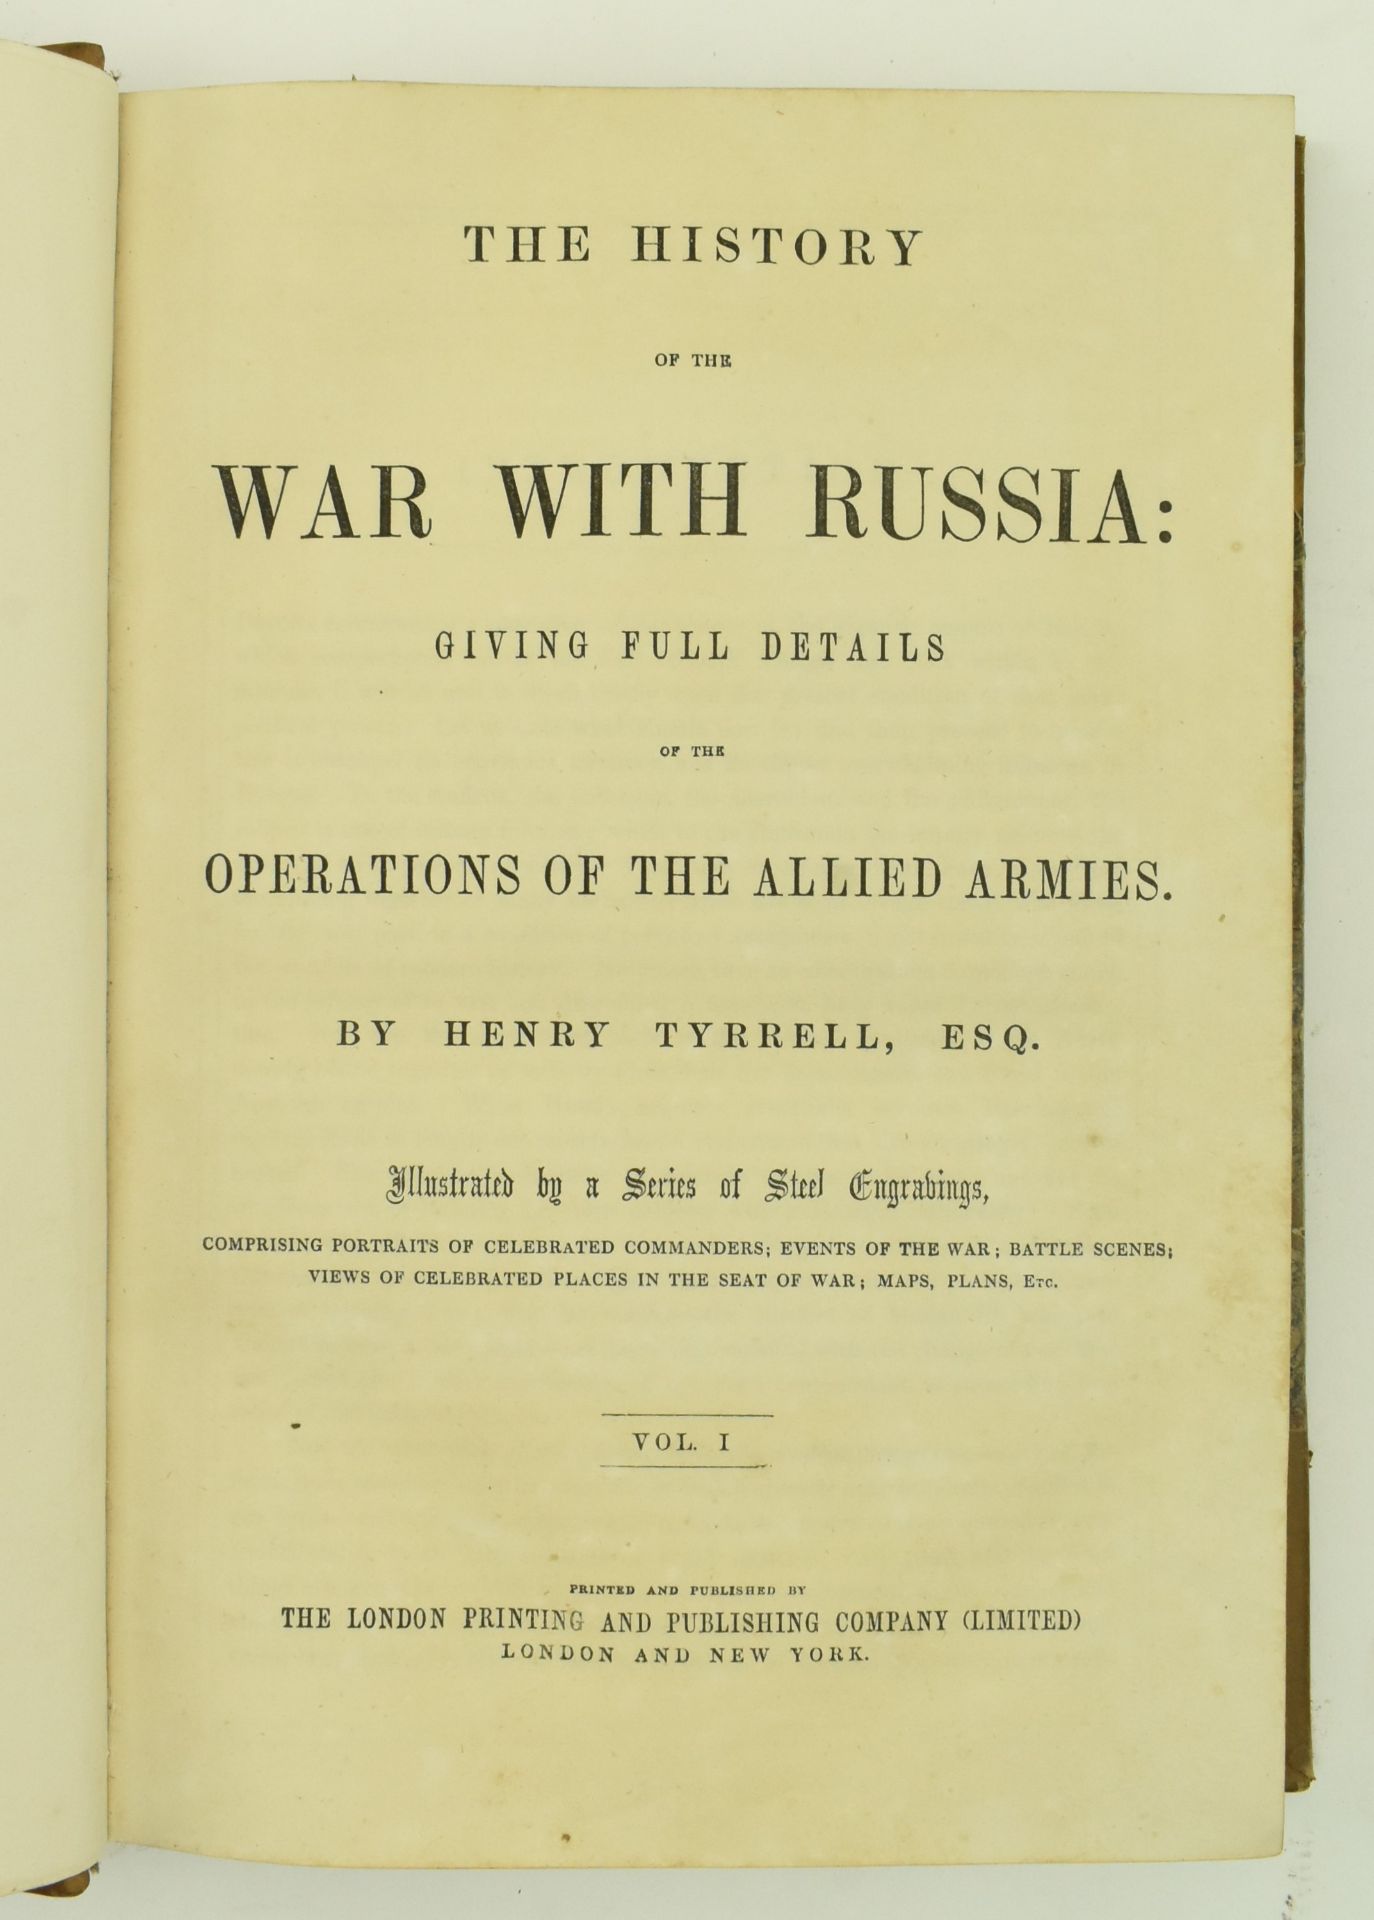 MILITARY HISTORY. THE HISTORY OF THE WAR WITH RUSSIA, 3VOL - Image 3 of 10